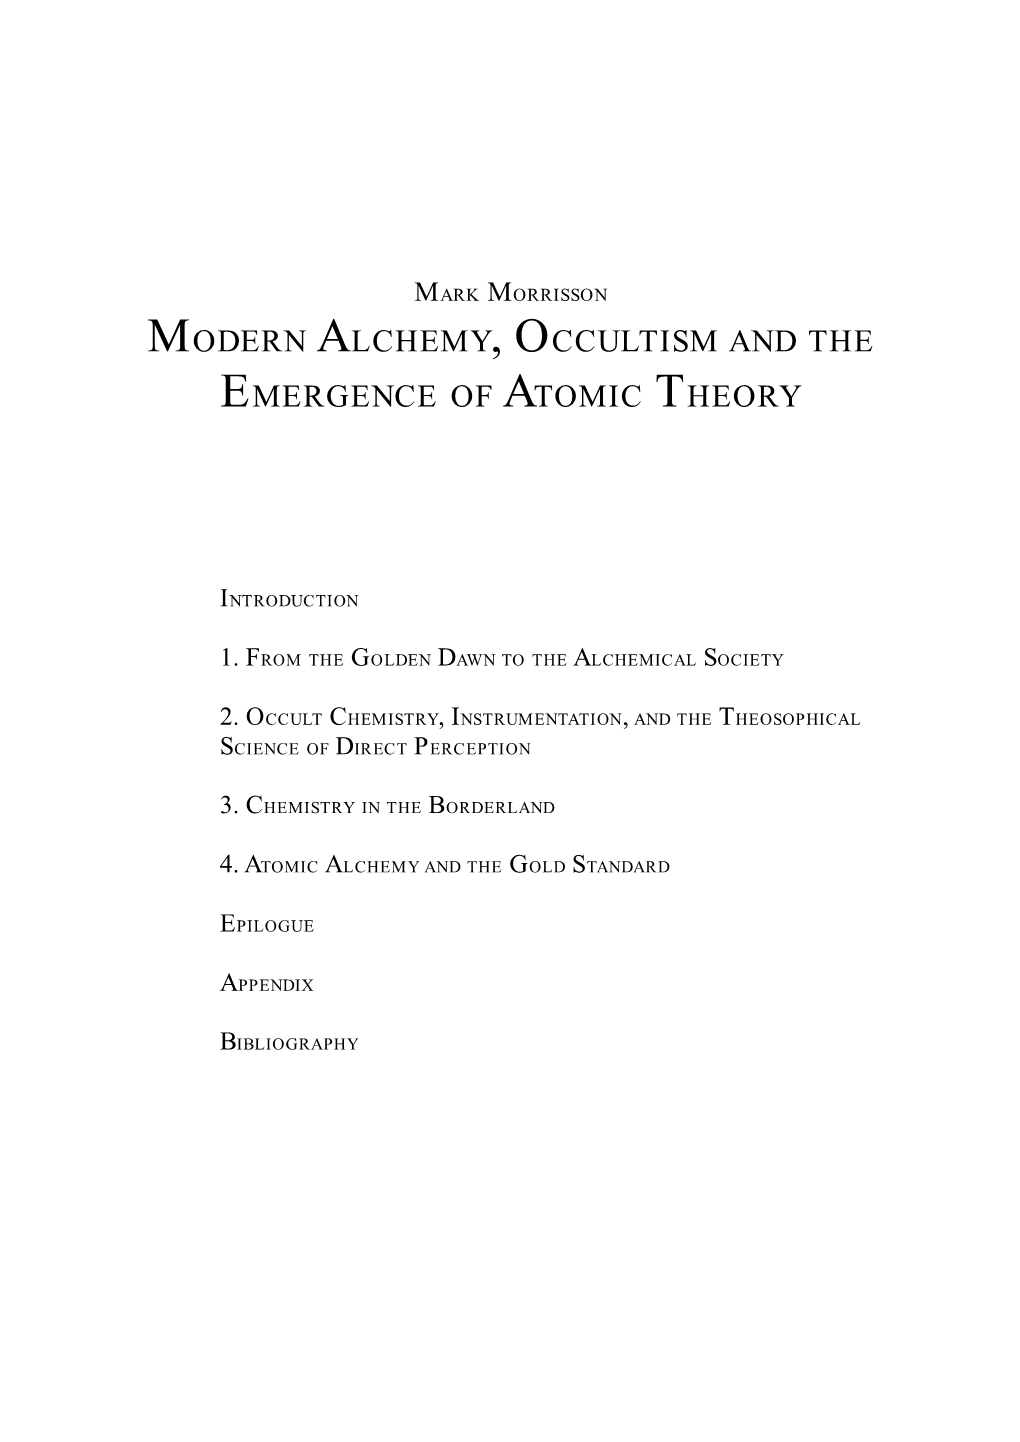 Modern Alchemy, Occultism and the Emergence of Atomic Theory